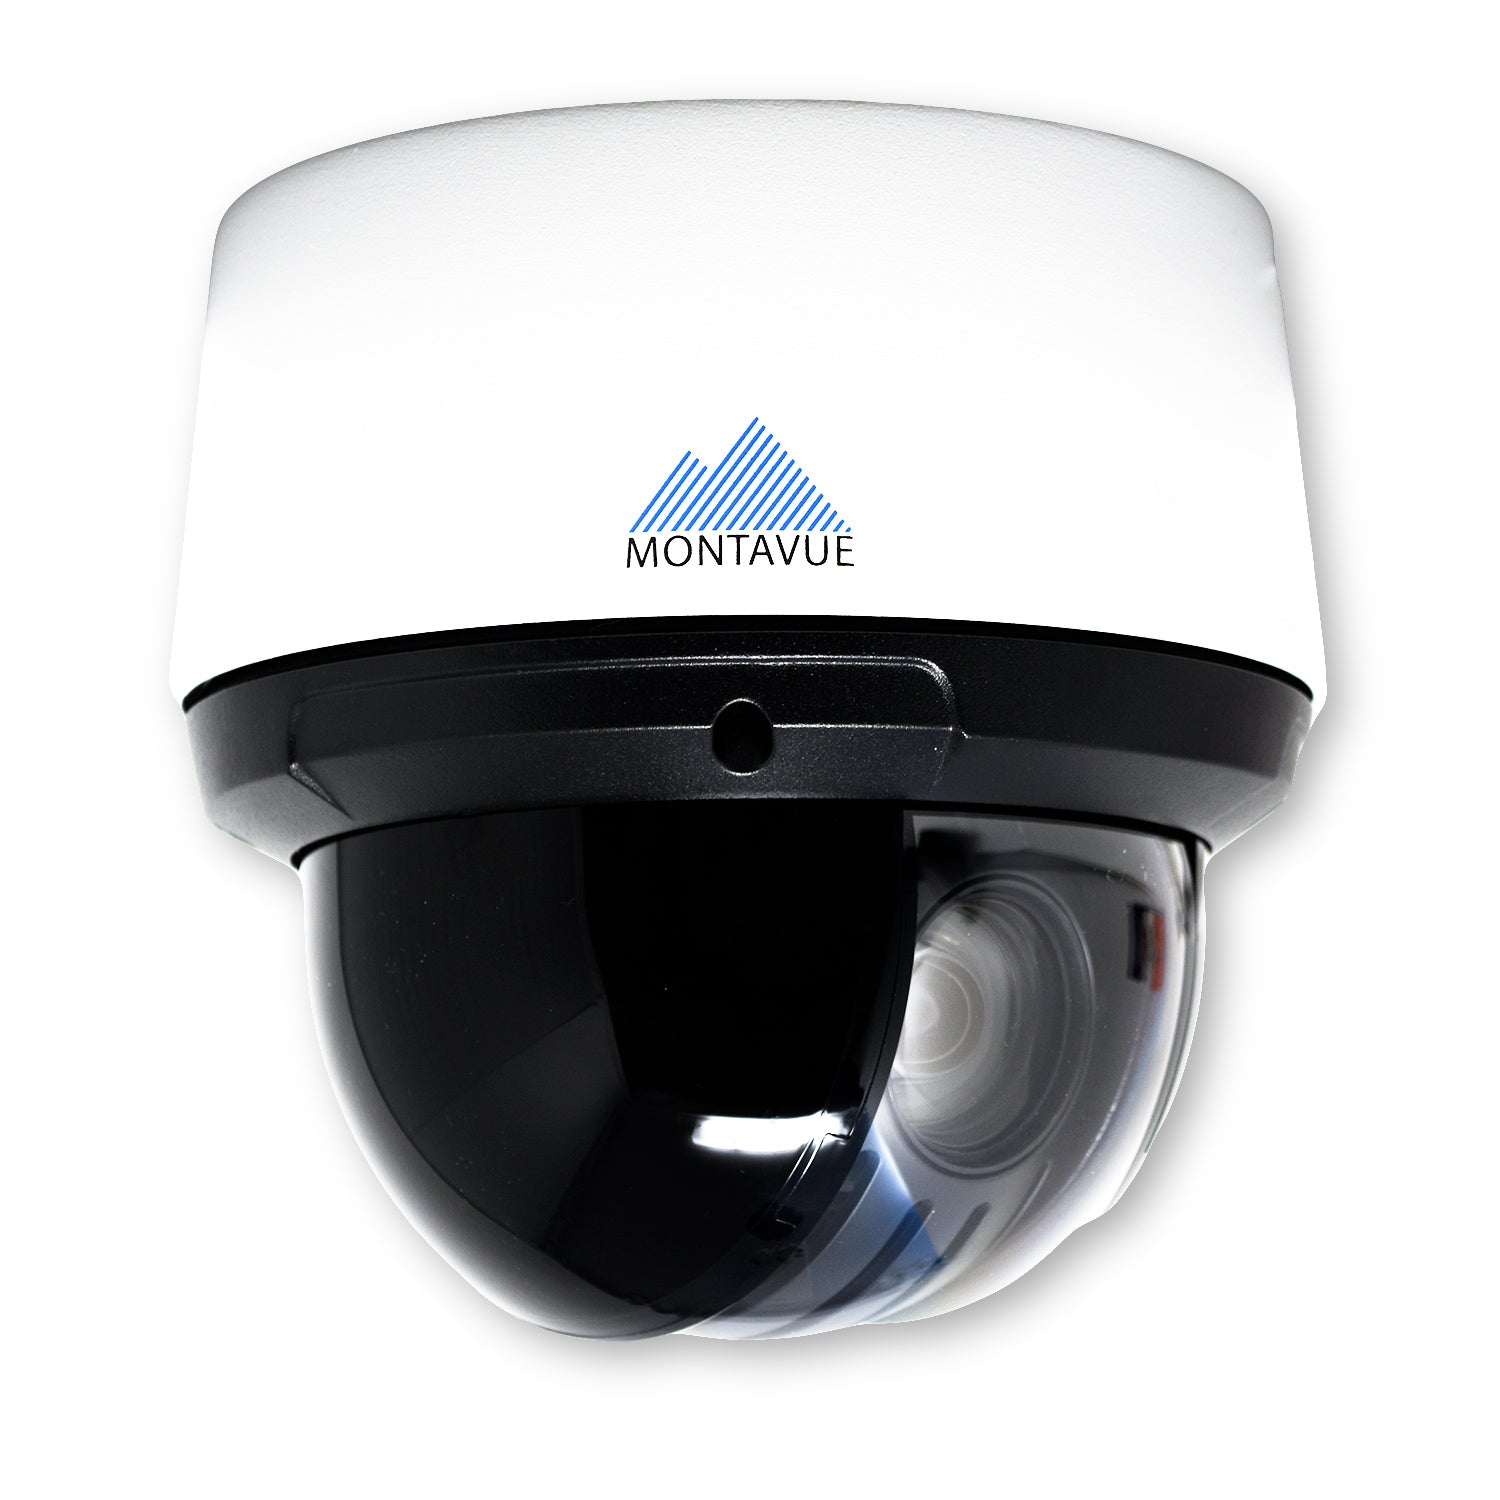 MTZ4250 | 4MP 2K Auto-Tracking PTZ Camera with 25x Zoom and SMD 3.0 - Montavue